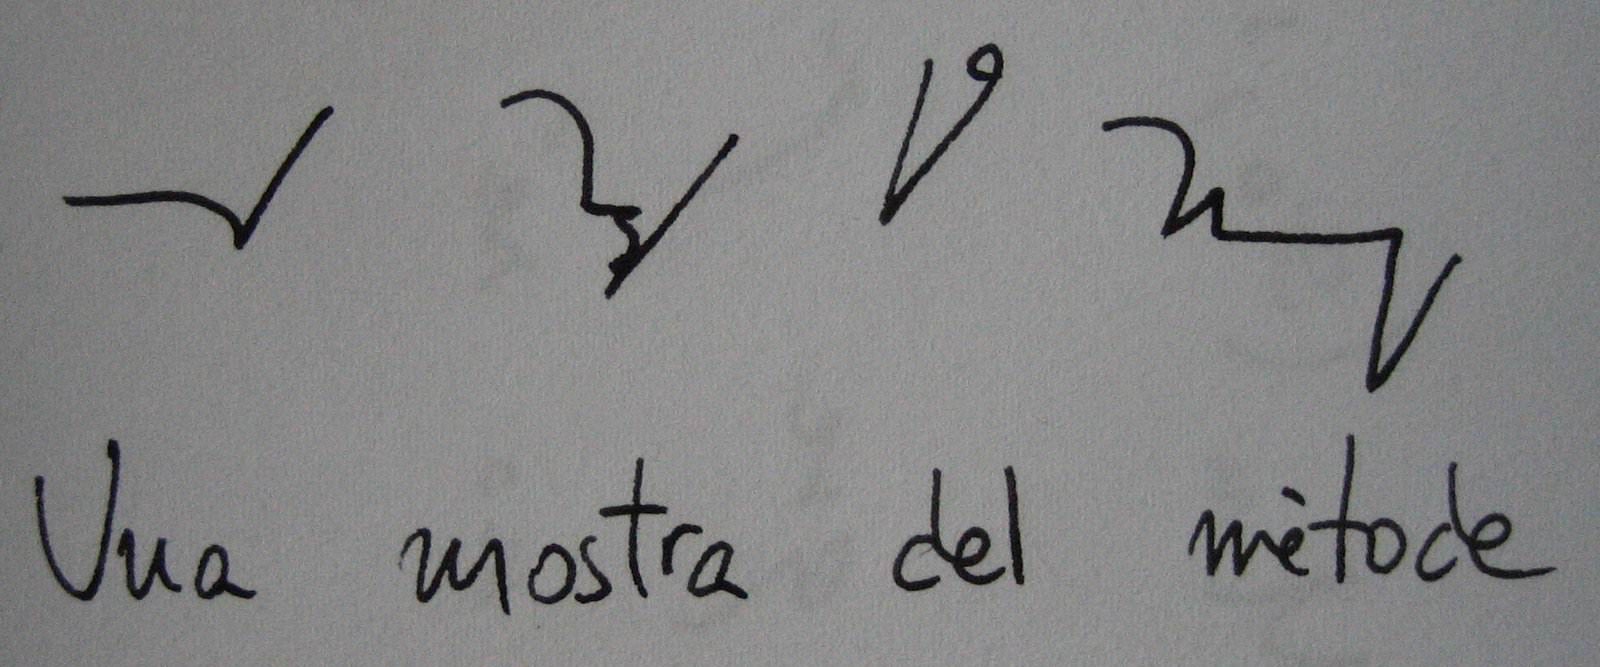 A phrase in catalan and the equivalent shorthand